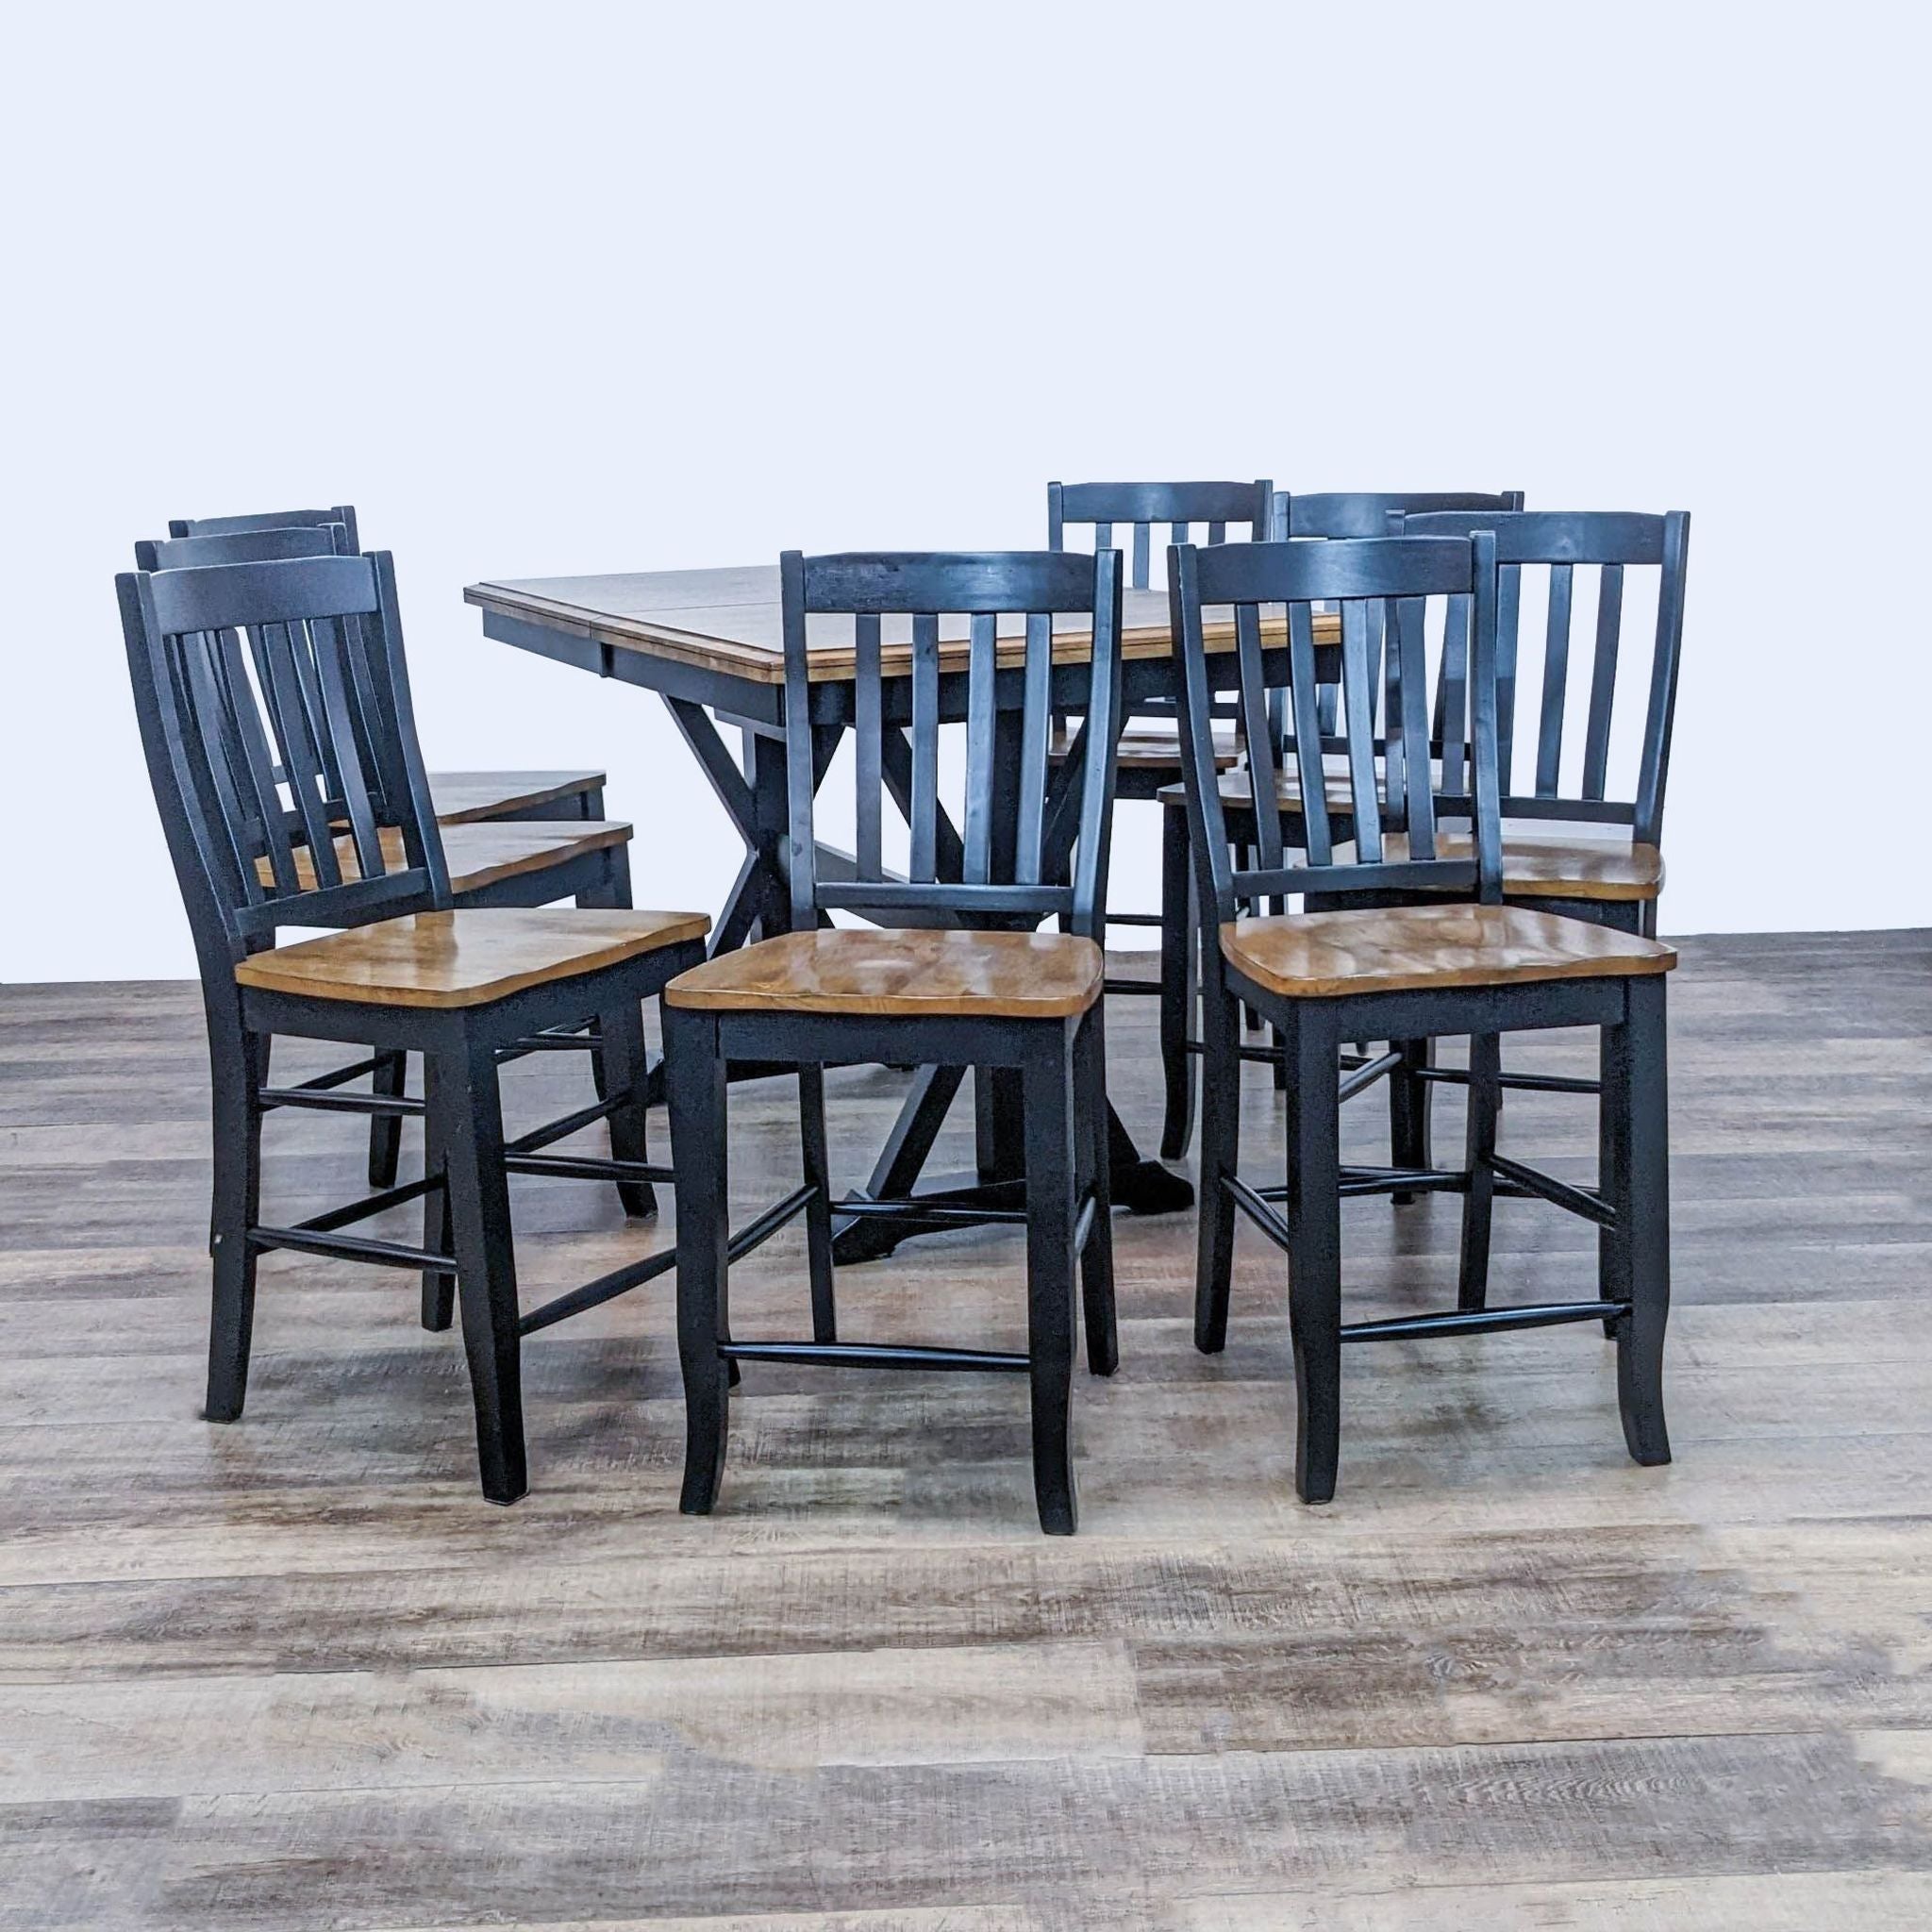 Alt text 1: Winners Only 7-piece dining set with a rectangular wood table and six chairs with black bases on a wooden floor.